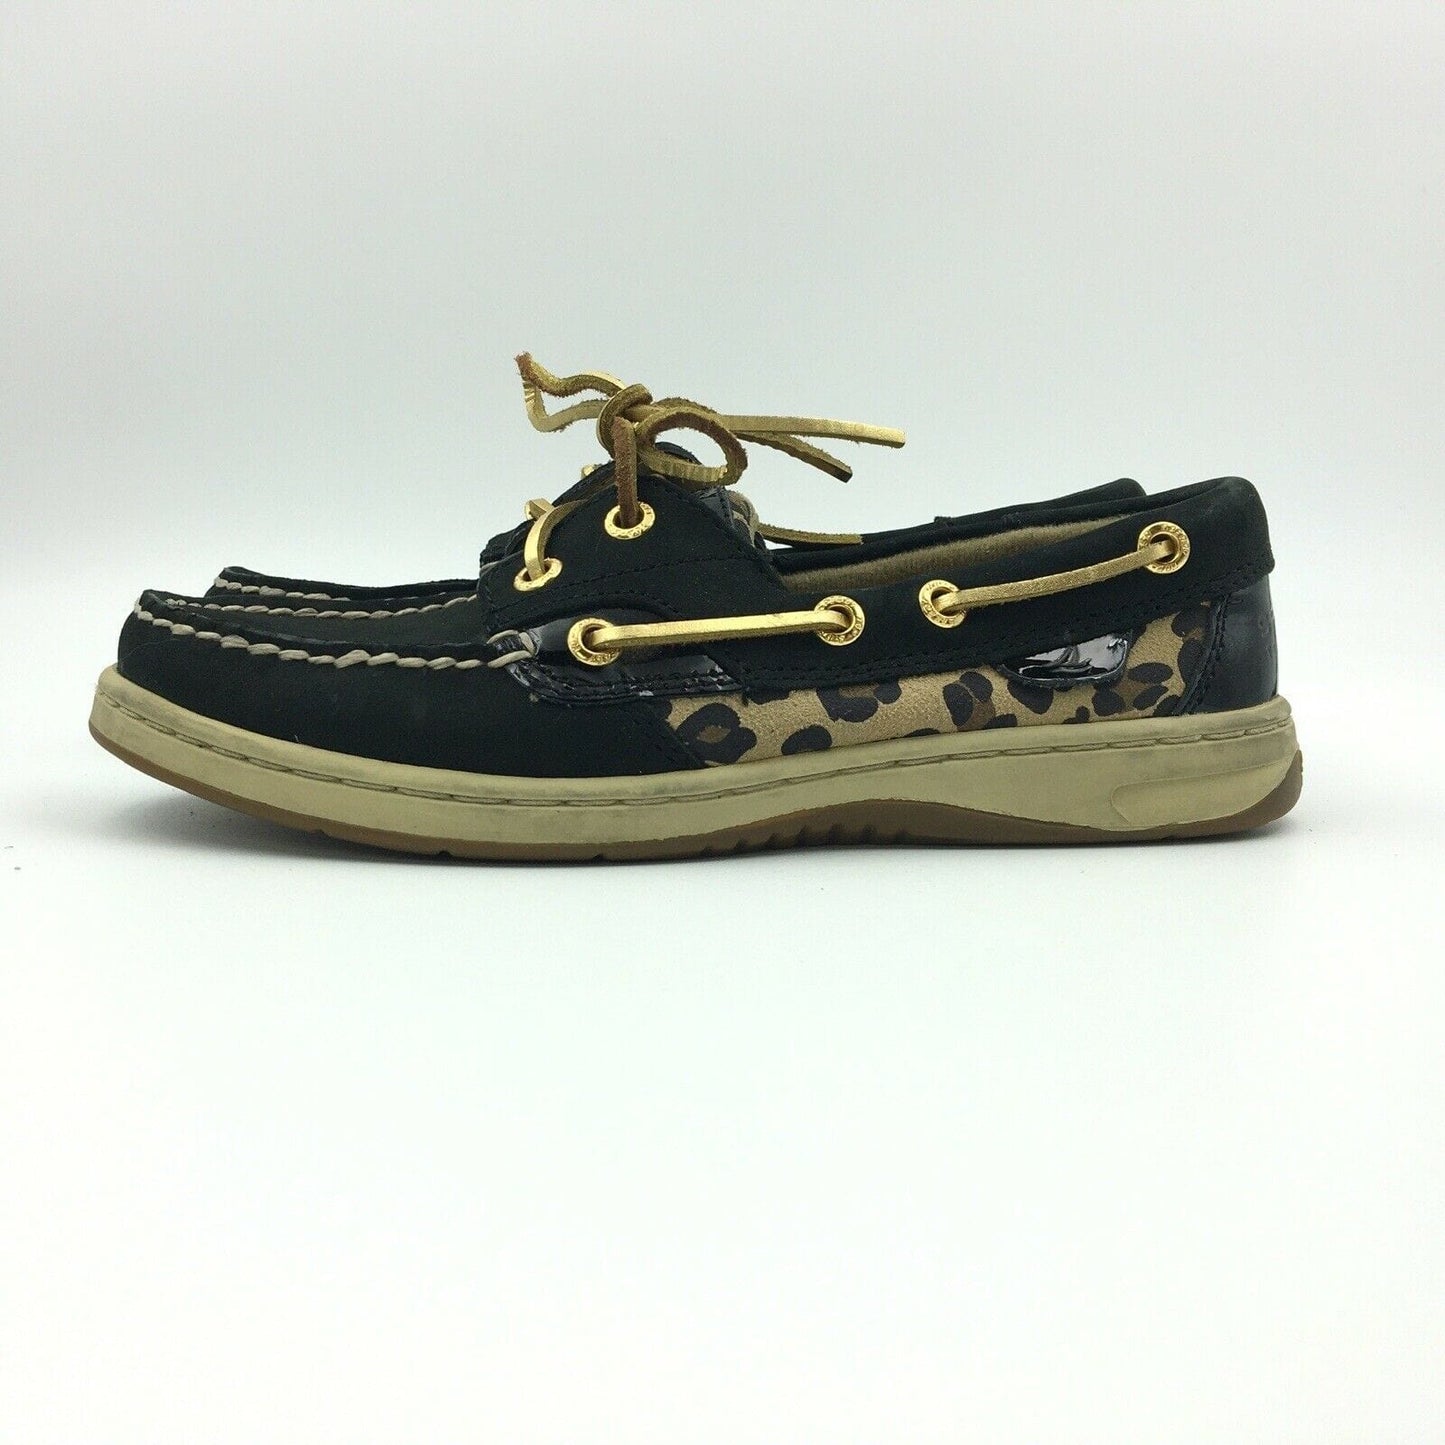 Sperry Top-Sider Womens Boat Shoes Black Leopard Patent Lace Up Size 5.5 M